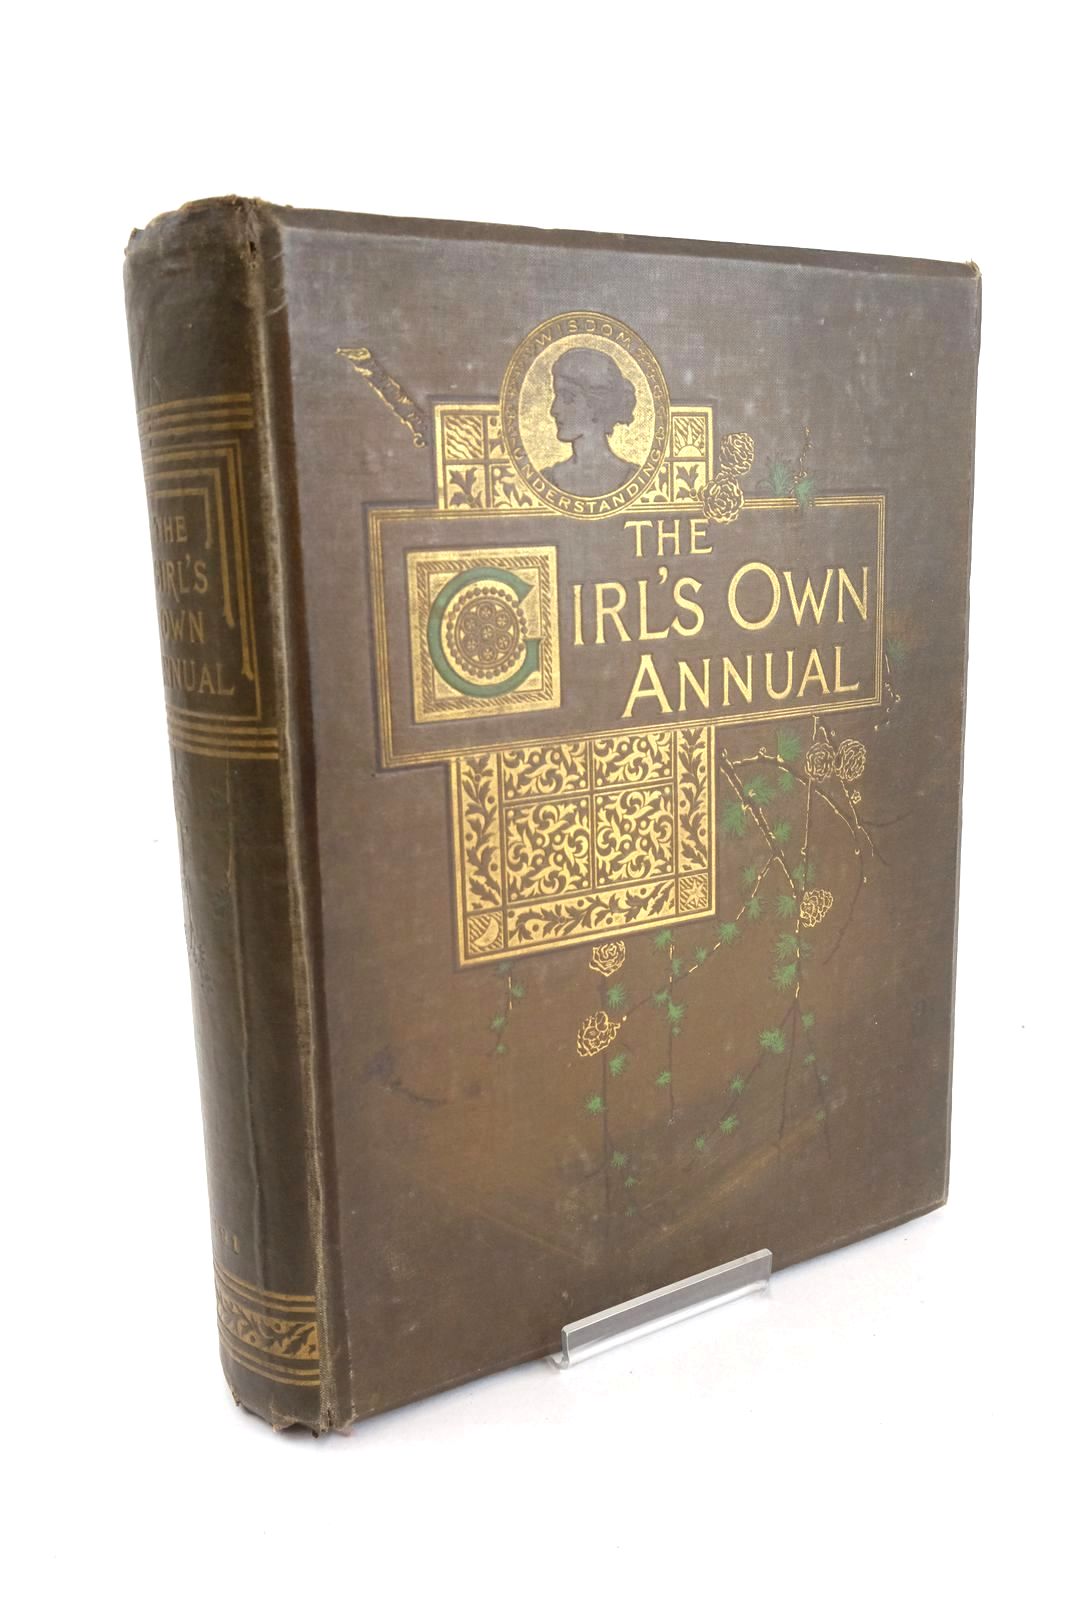 Photo of THE GIRL'S OWN ANNUAL 1890-1891 illustrated by Greenaway, Kate et al., published by Girl's Own Paper (STOCK CODE: 1325976)  for sale by Stella & Rose's Books